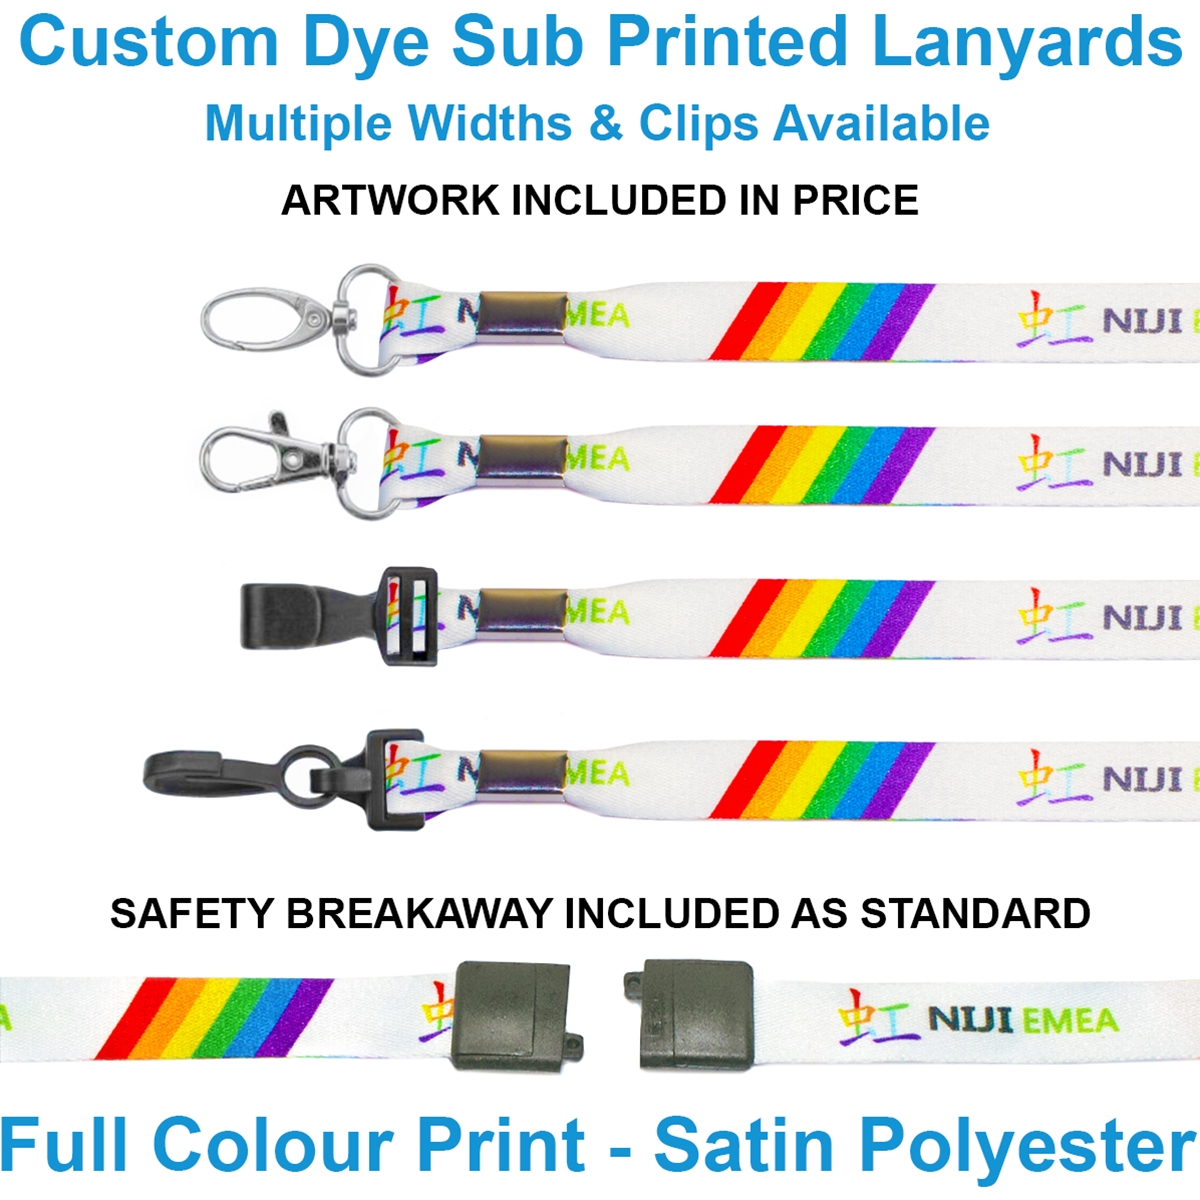 Custom dye sublimation lanyards with various clips in plastic and metal